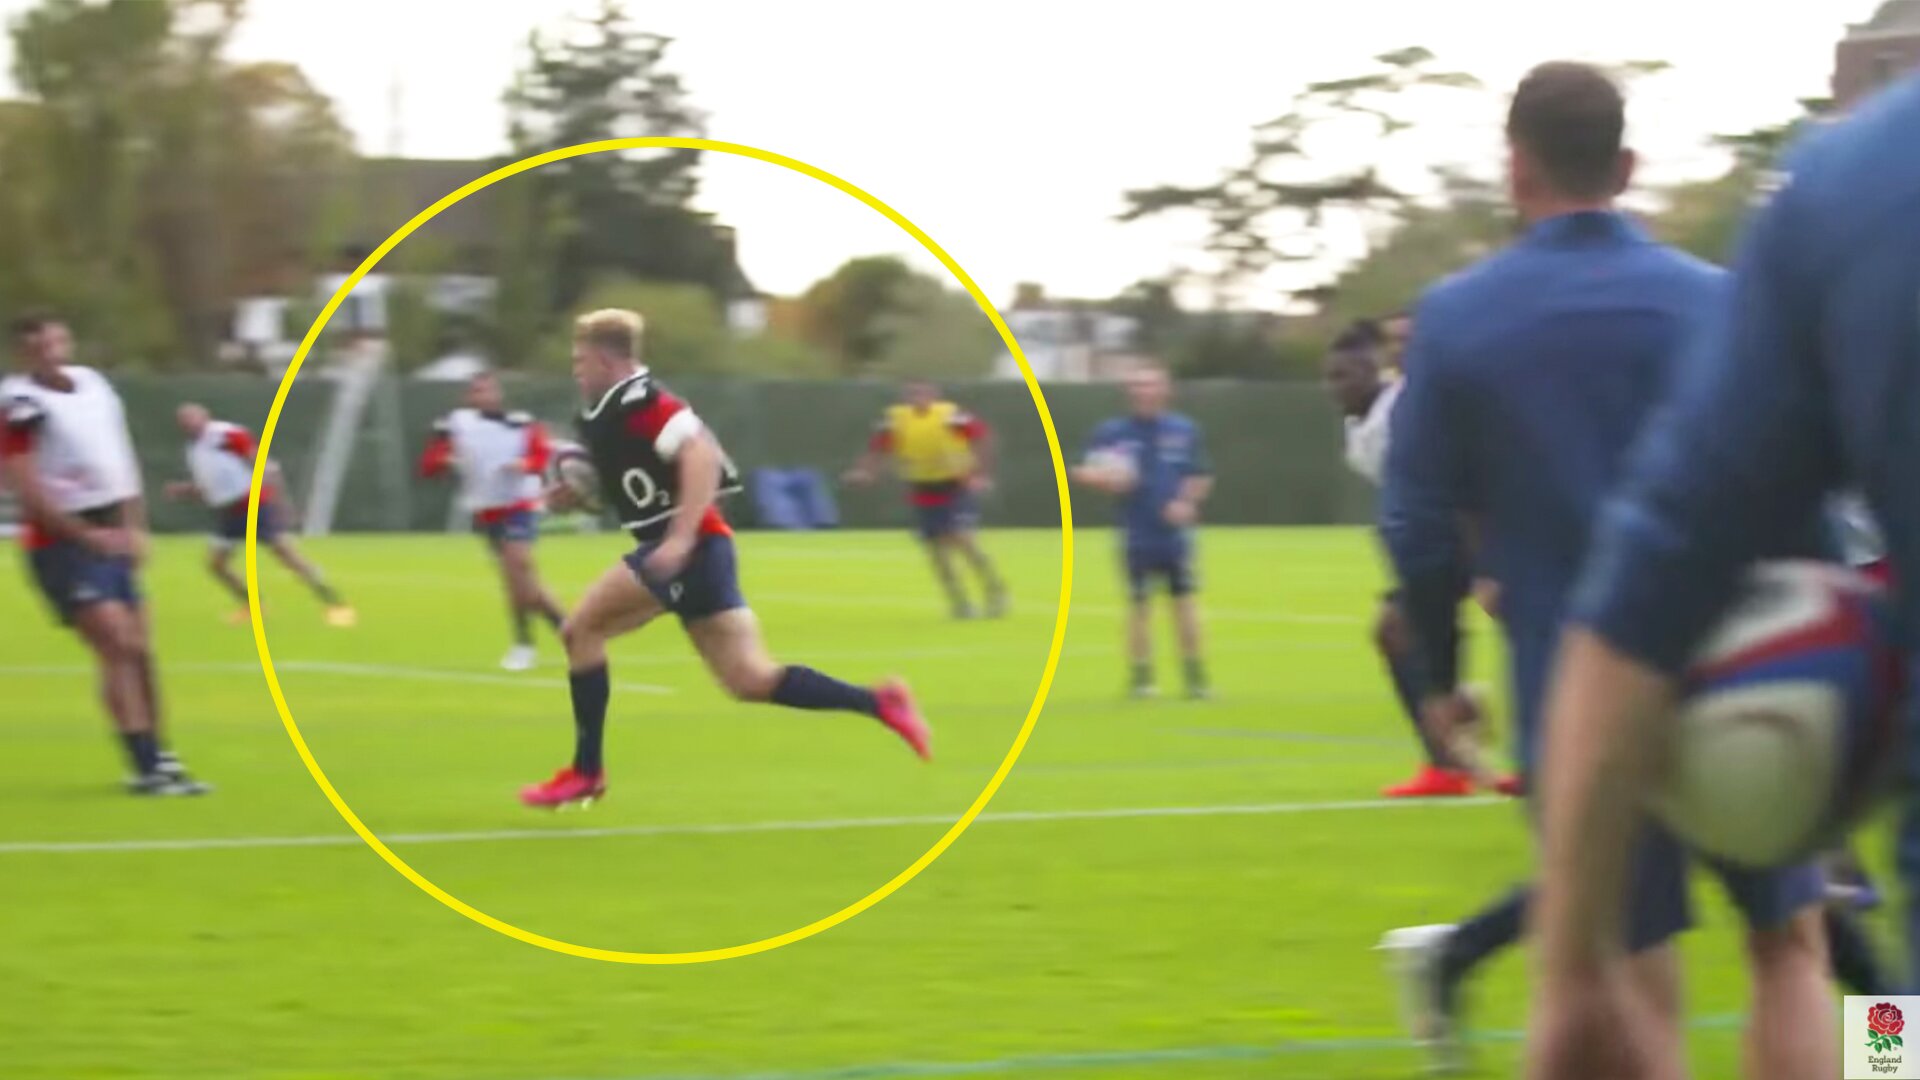 New England video showcases the unbelievable speed of rising star, Ollie Thorley